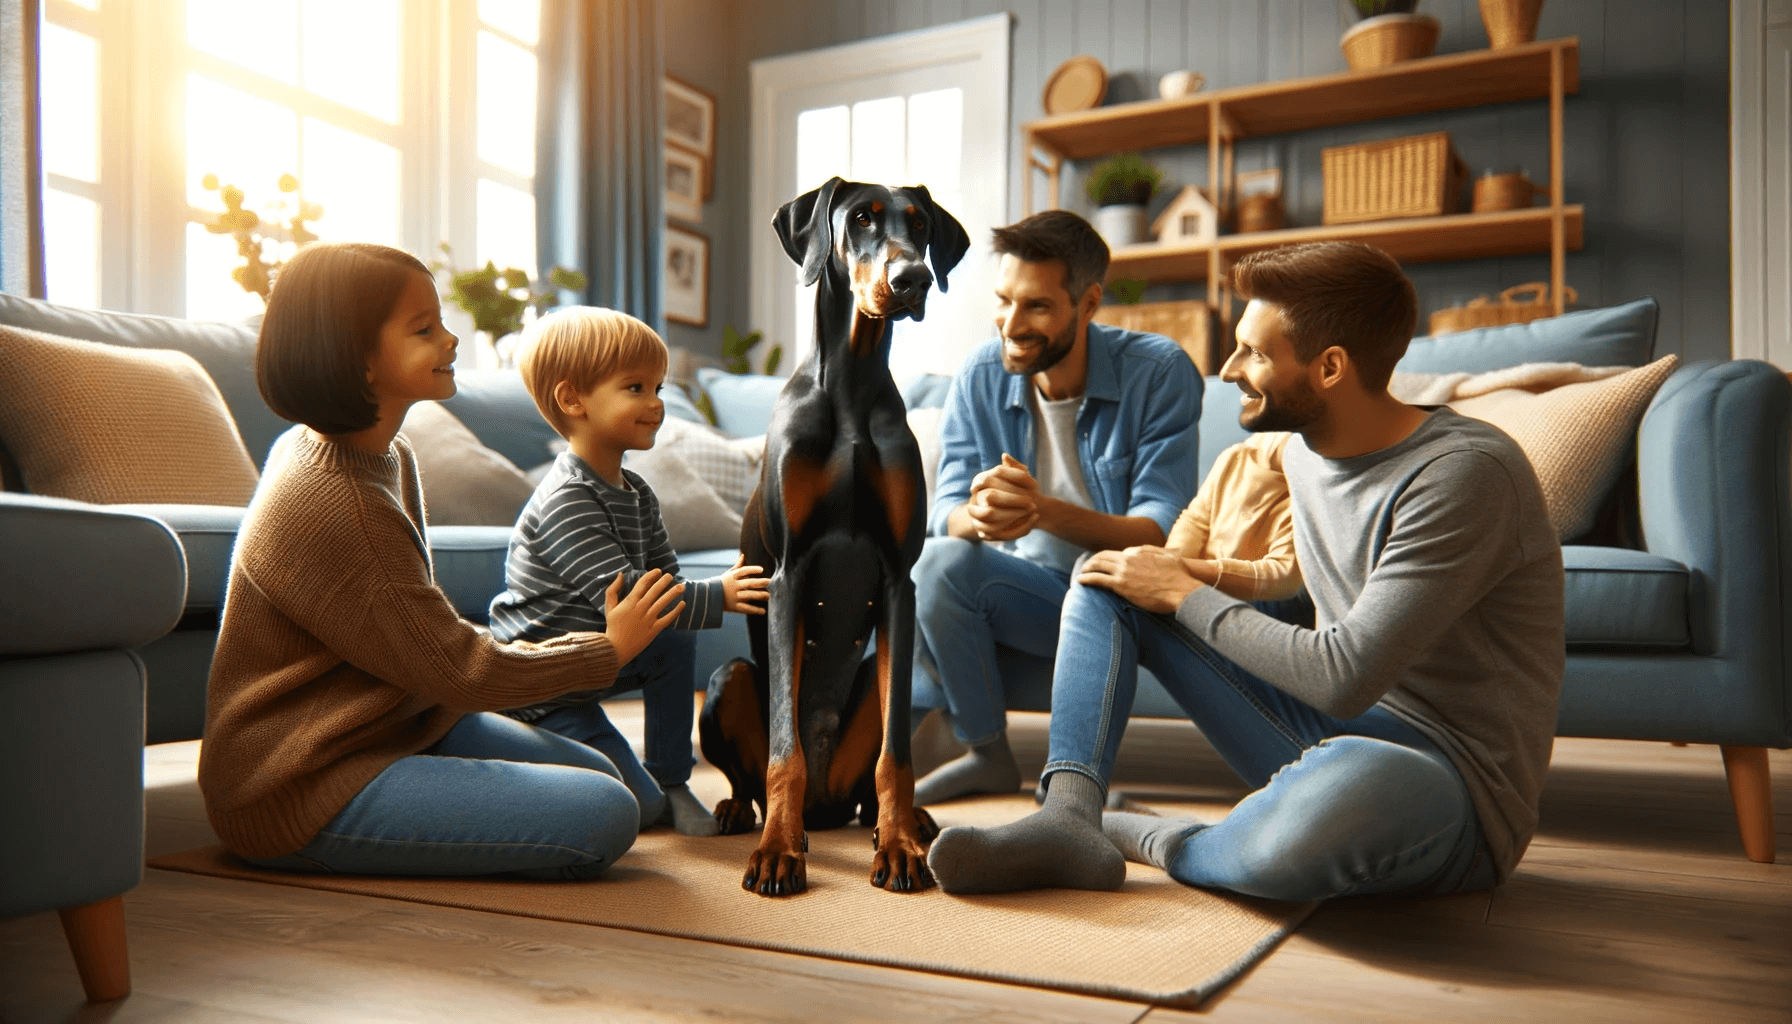 A Blue Doberman in a family setting, interacting gently with children and adults in a cozy living room.